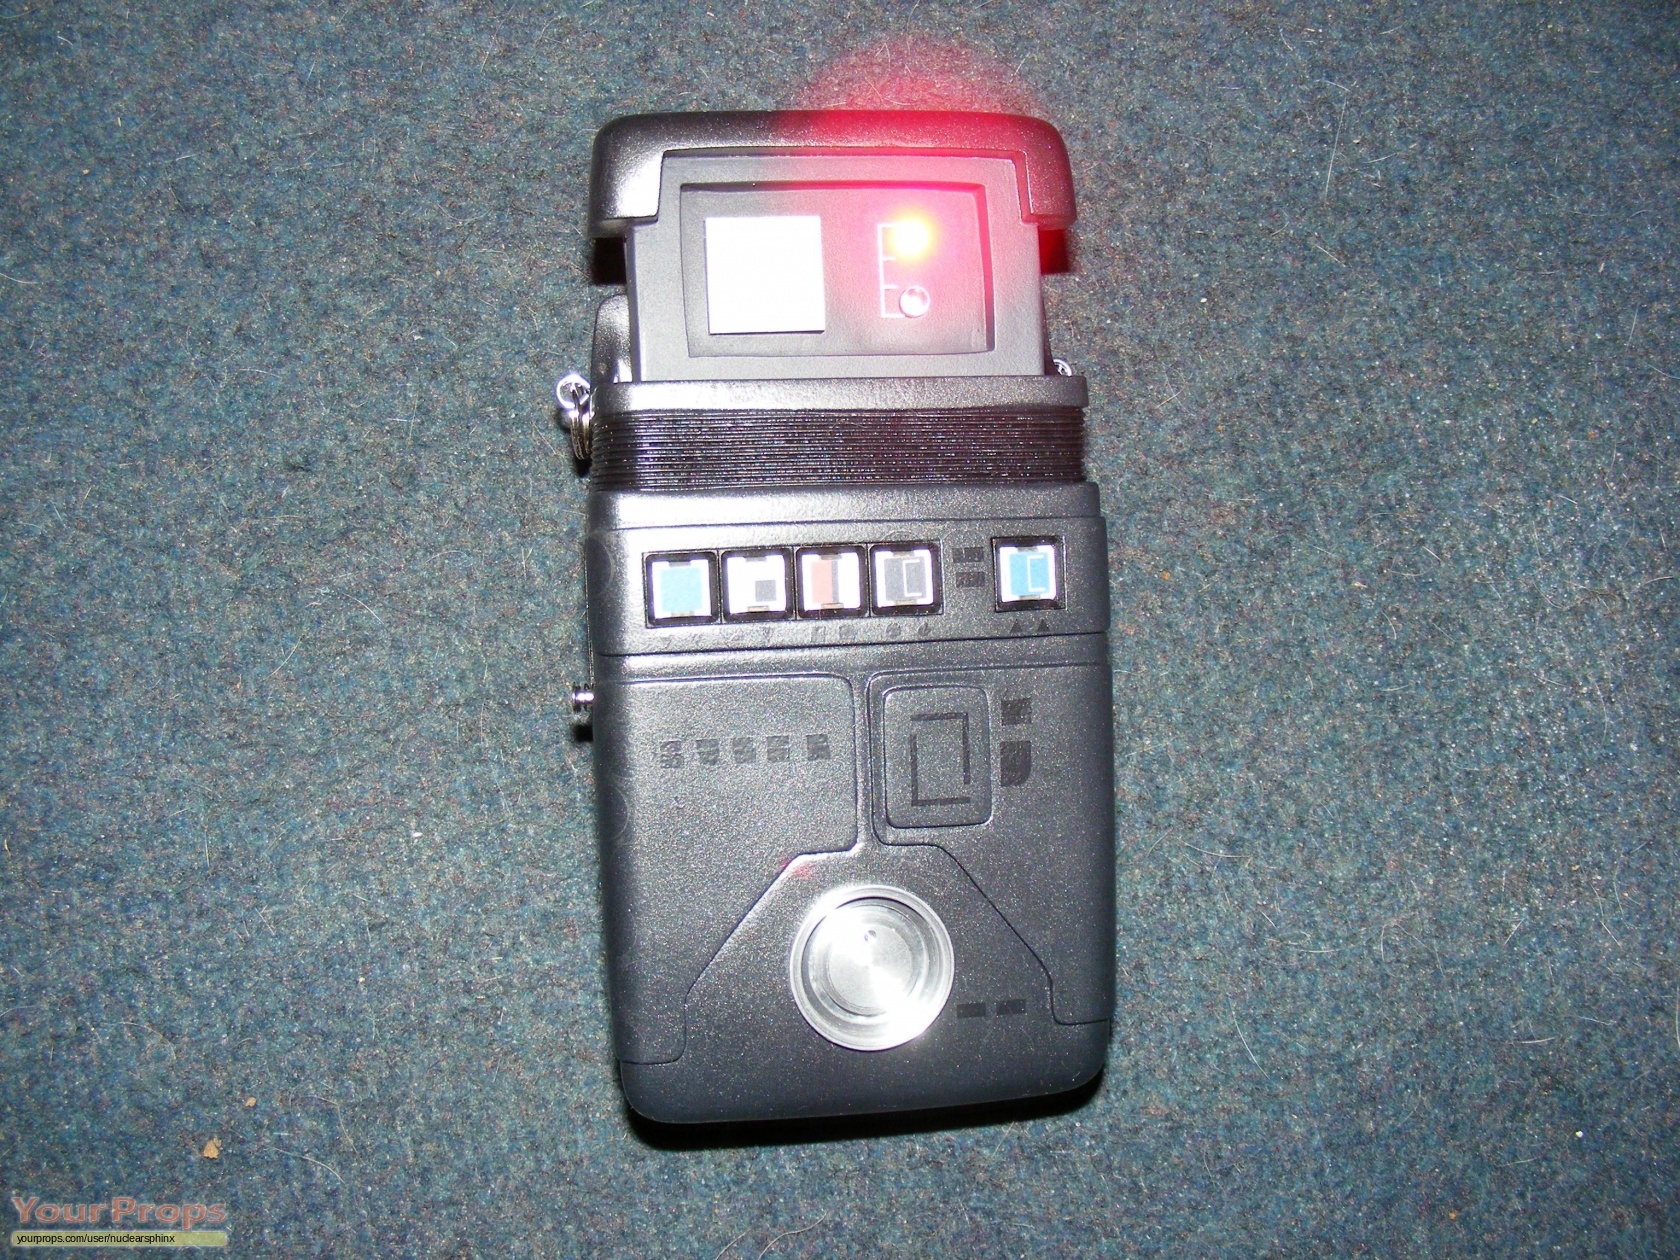 Star-Trek-III-The-Search-for-Spock-Hero-Tricorder-with-sound-3-476405461.jpeg